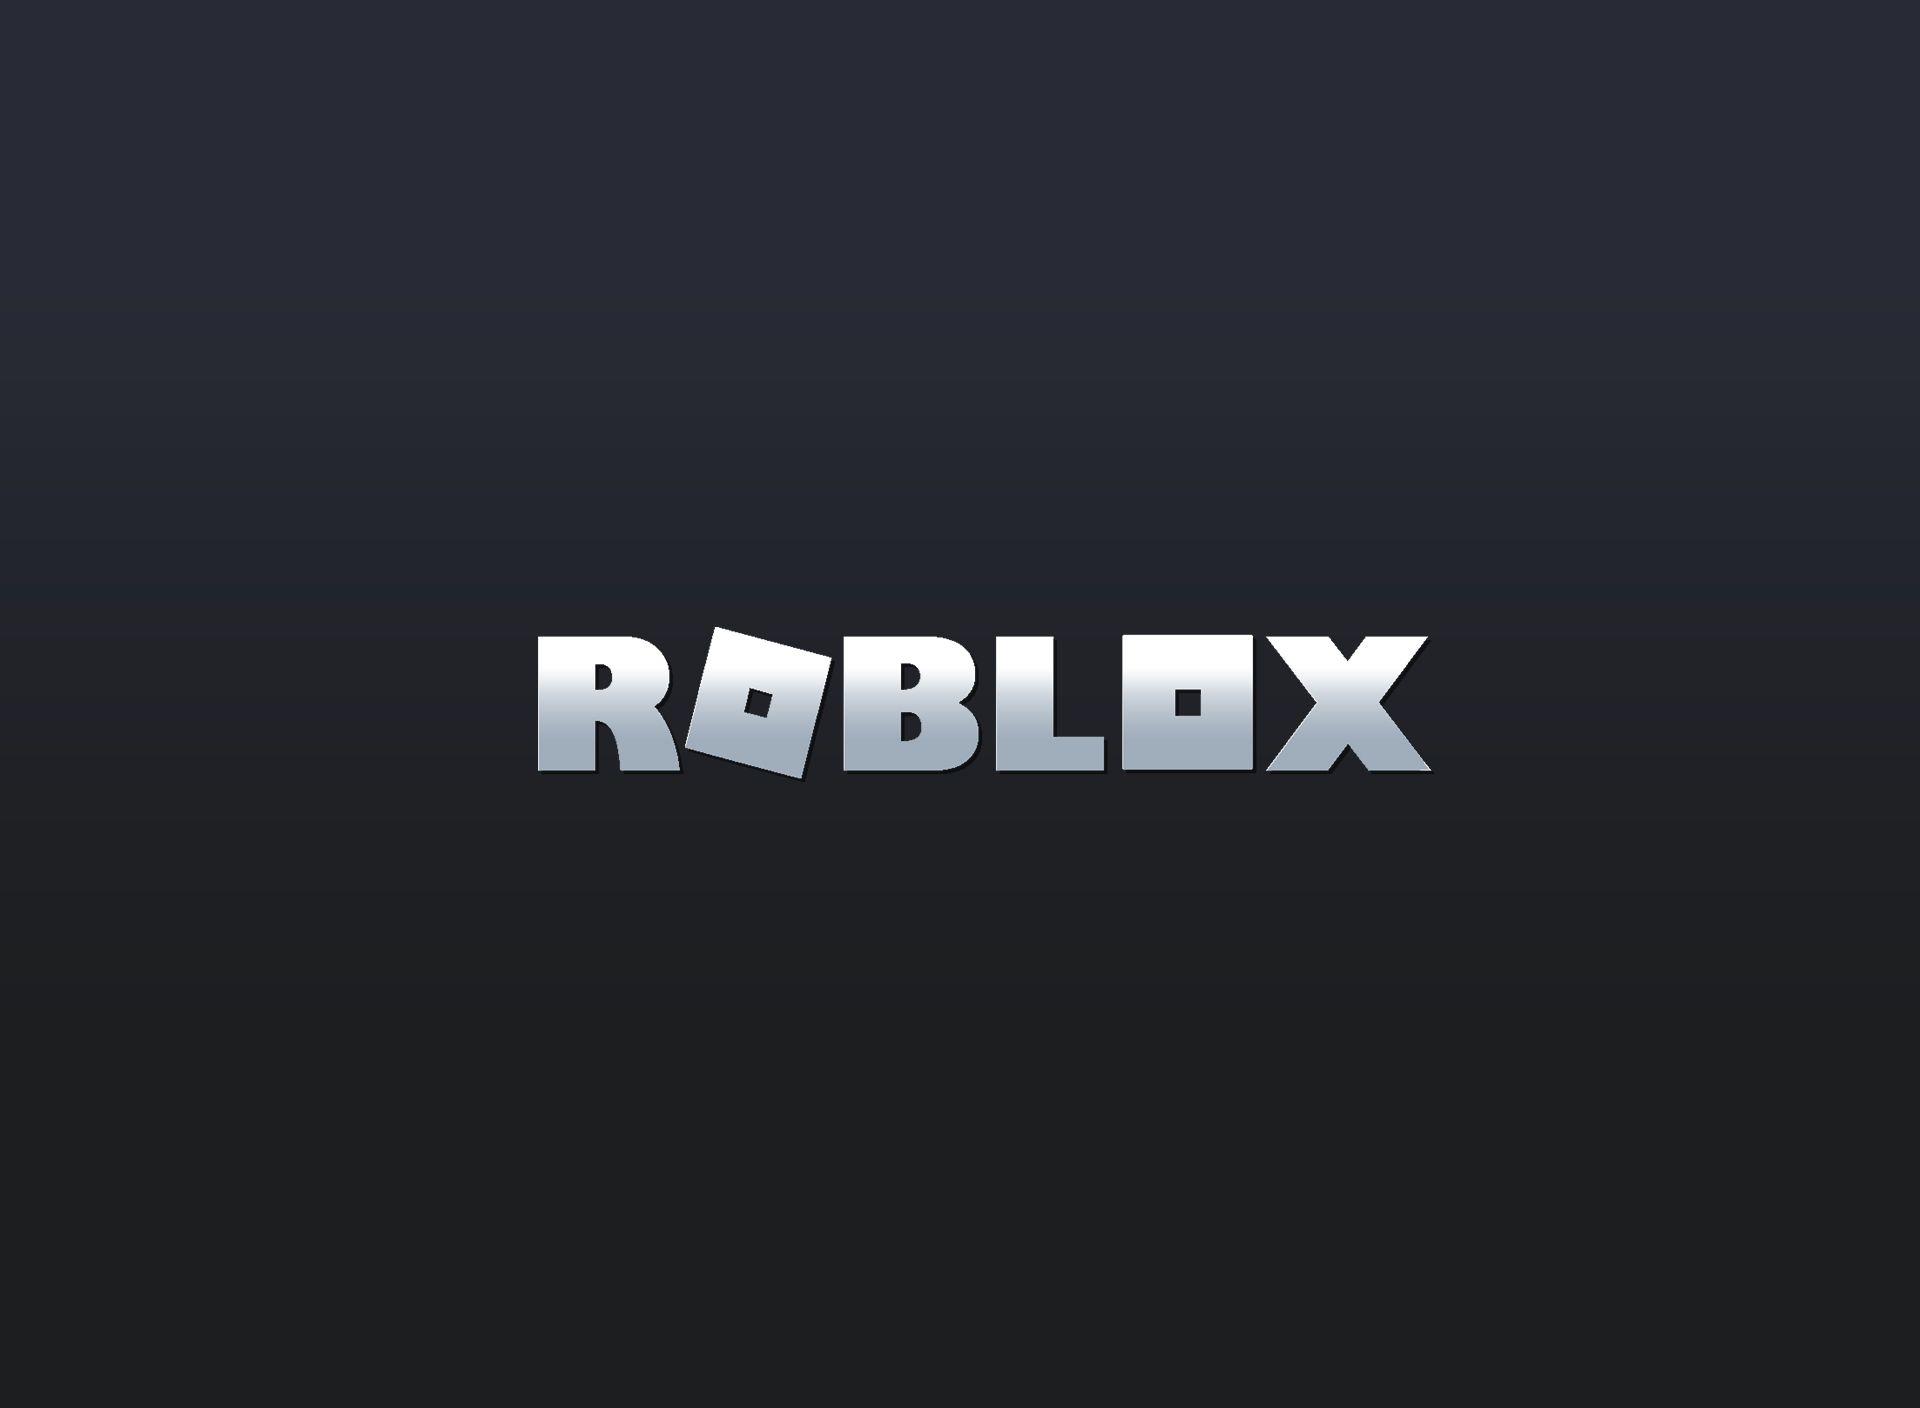 Roblox Youtube Wallpapers Top Free Roblox Youtube Backgrounds Wallpaperaccess - robux hd